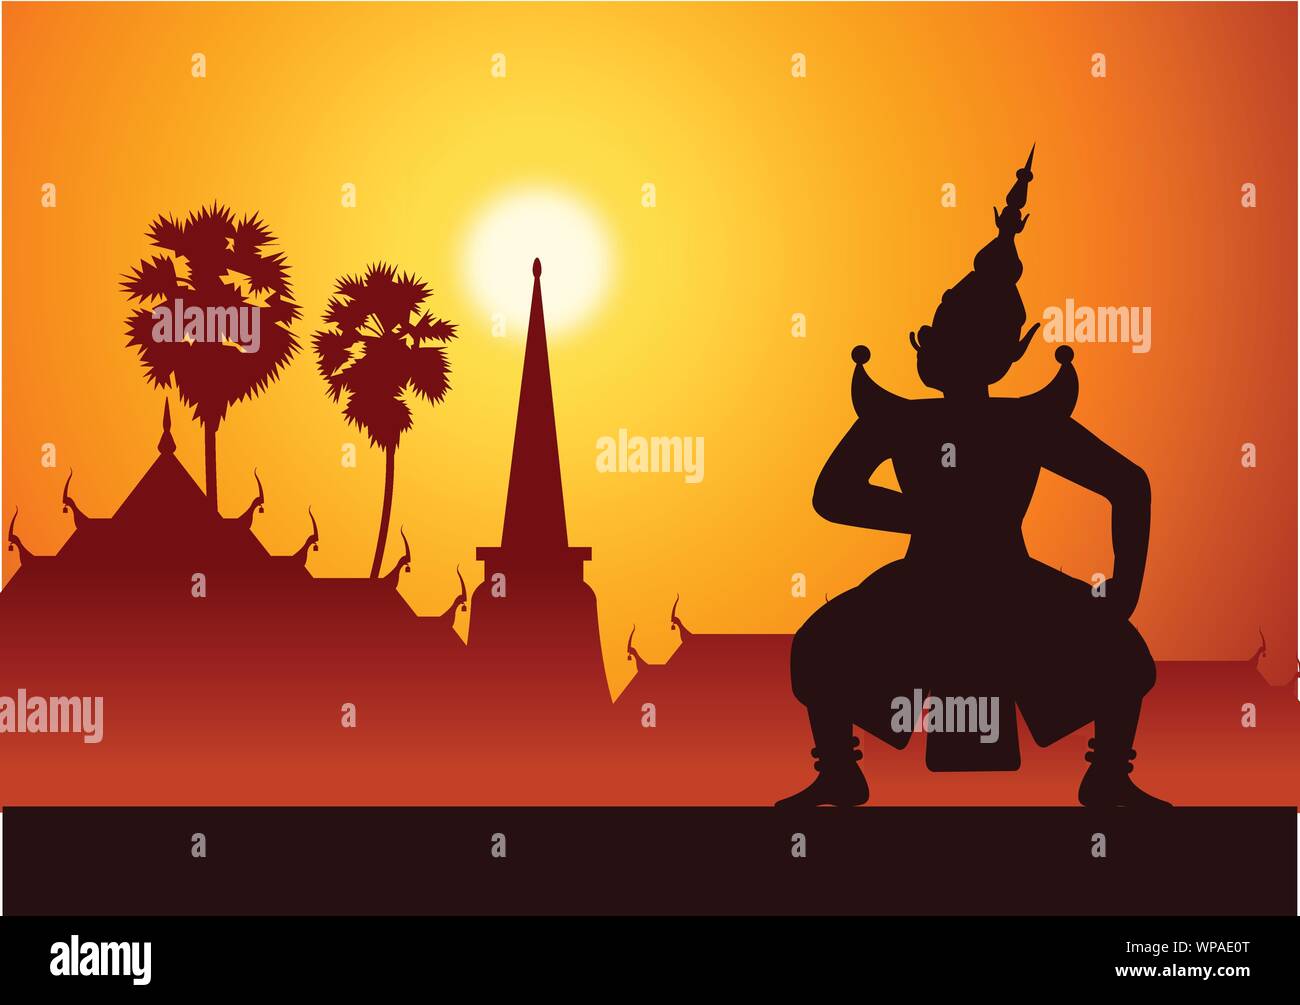 Thai ancient literature play,Ramayana,king of giant ready to fight,silhouette style,scenery background,vector illustration Stock Vector